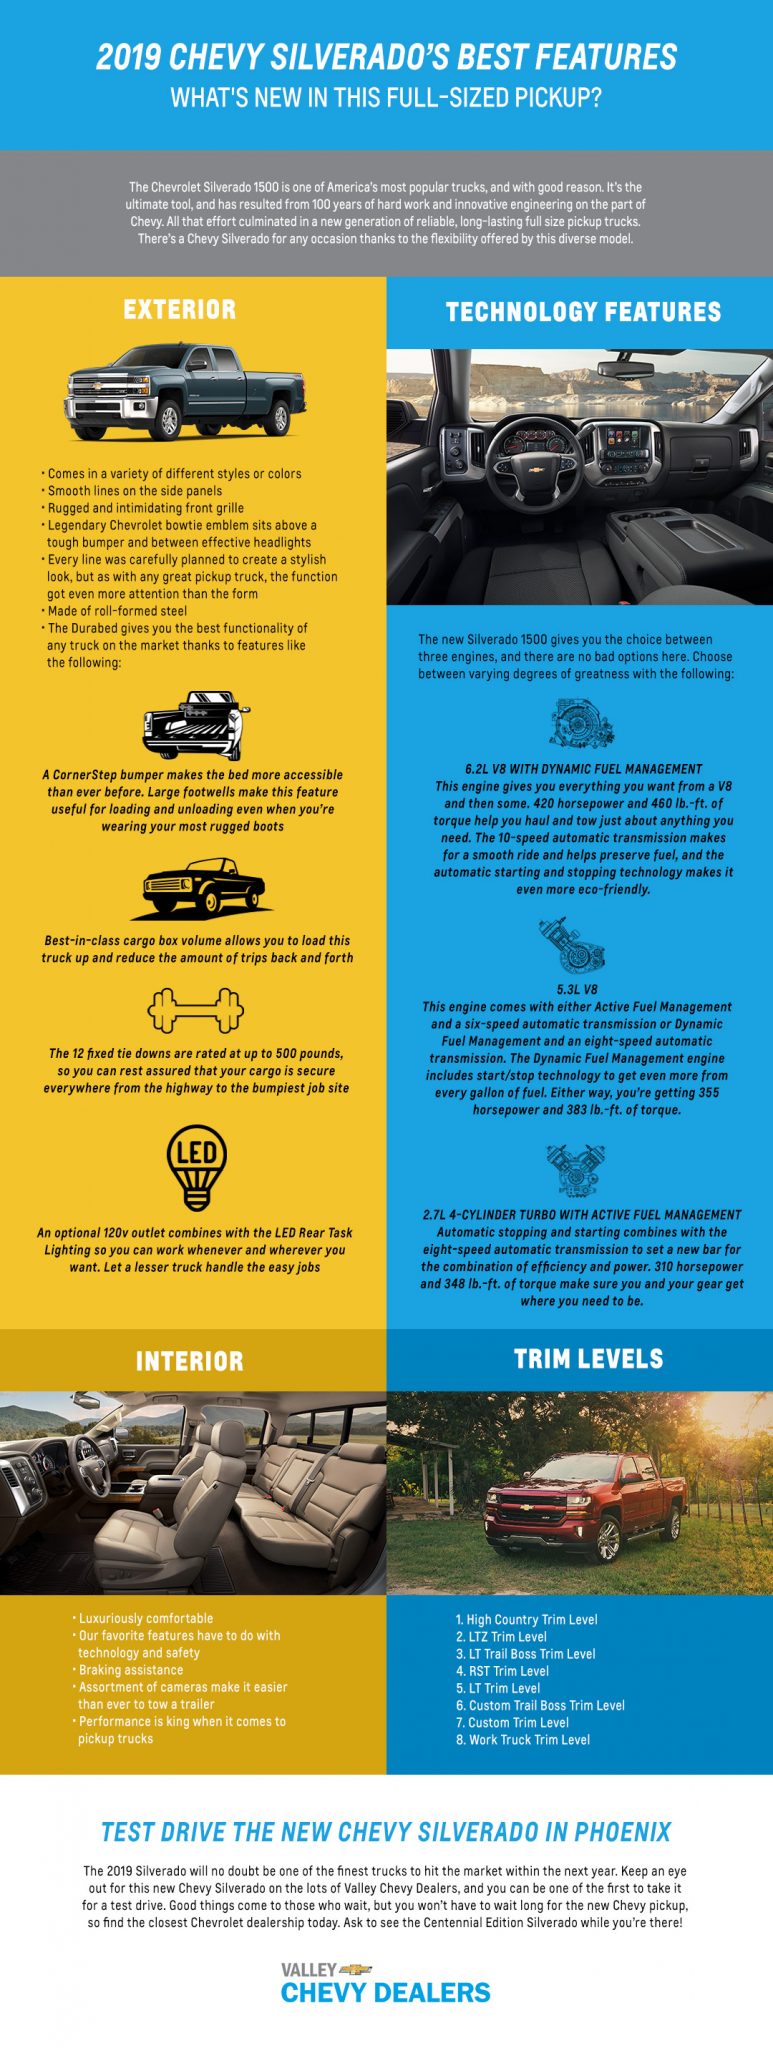 2019 Chevy Silverado’s Best Features Infograph